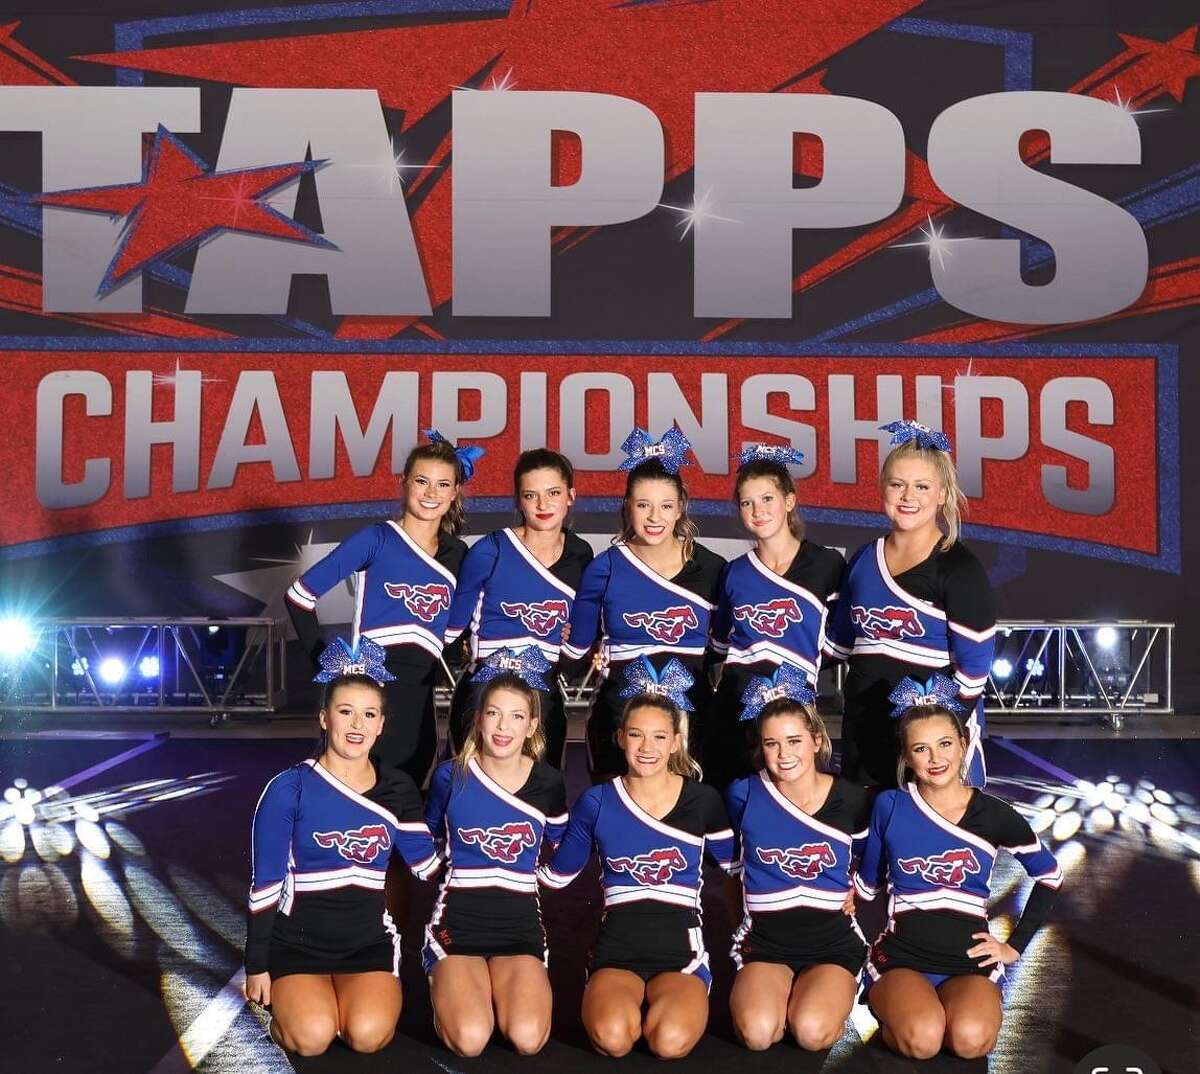 Midland Christian cheer team takes 3rd at TAPPS state competition